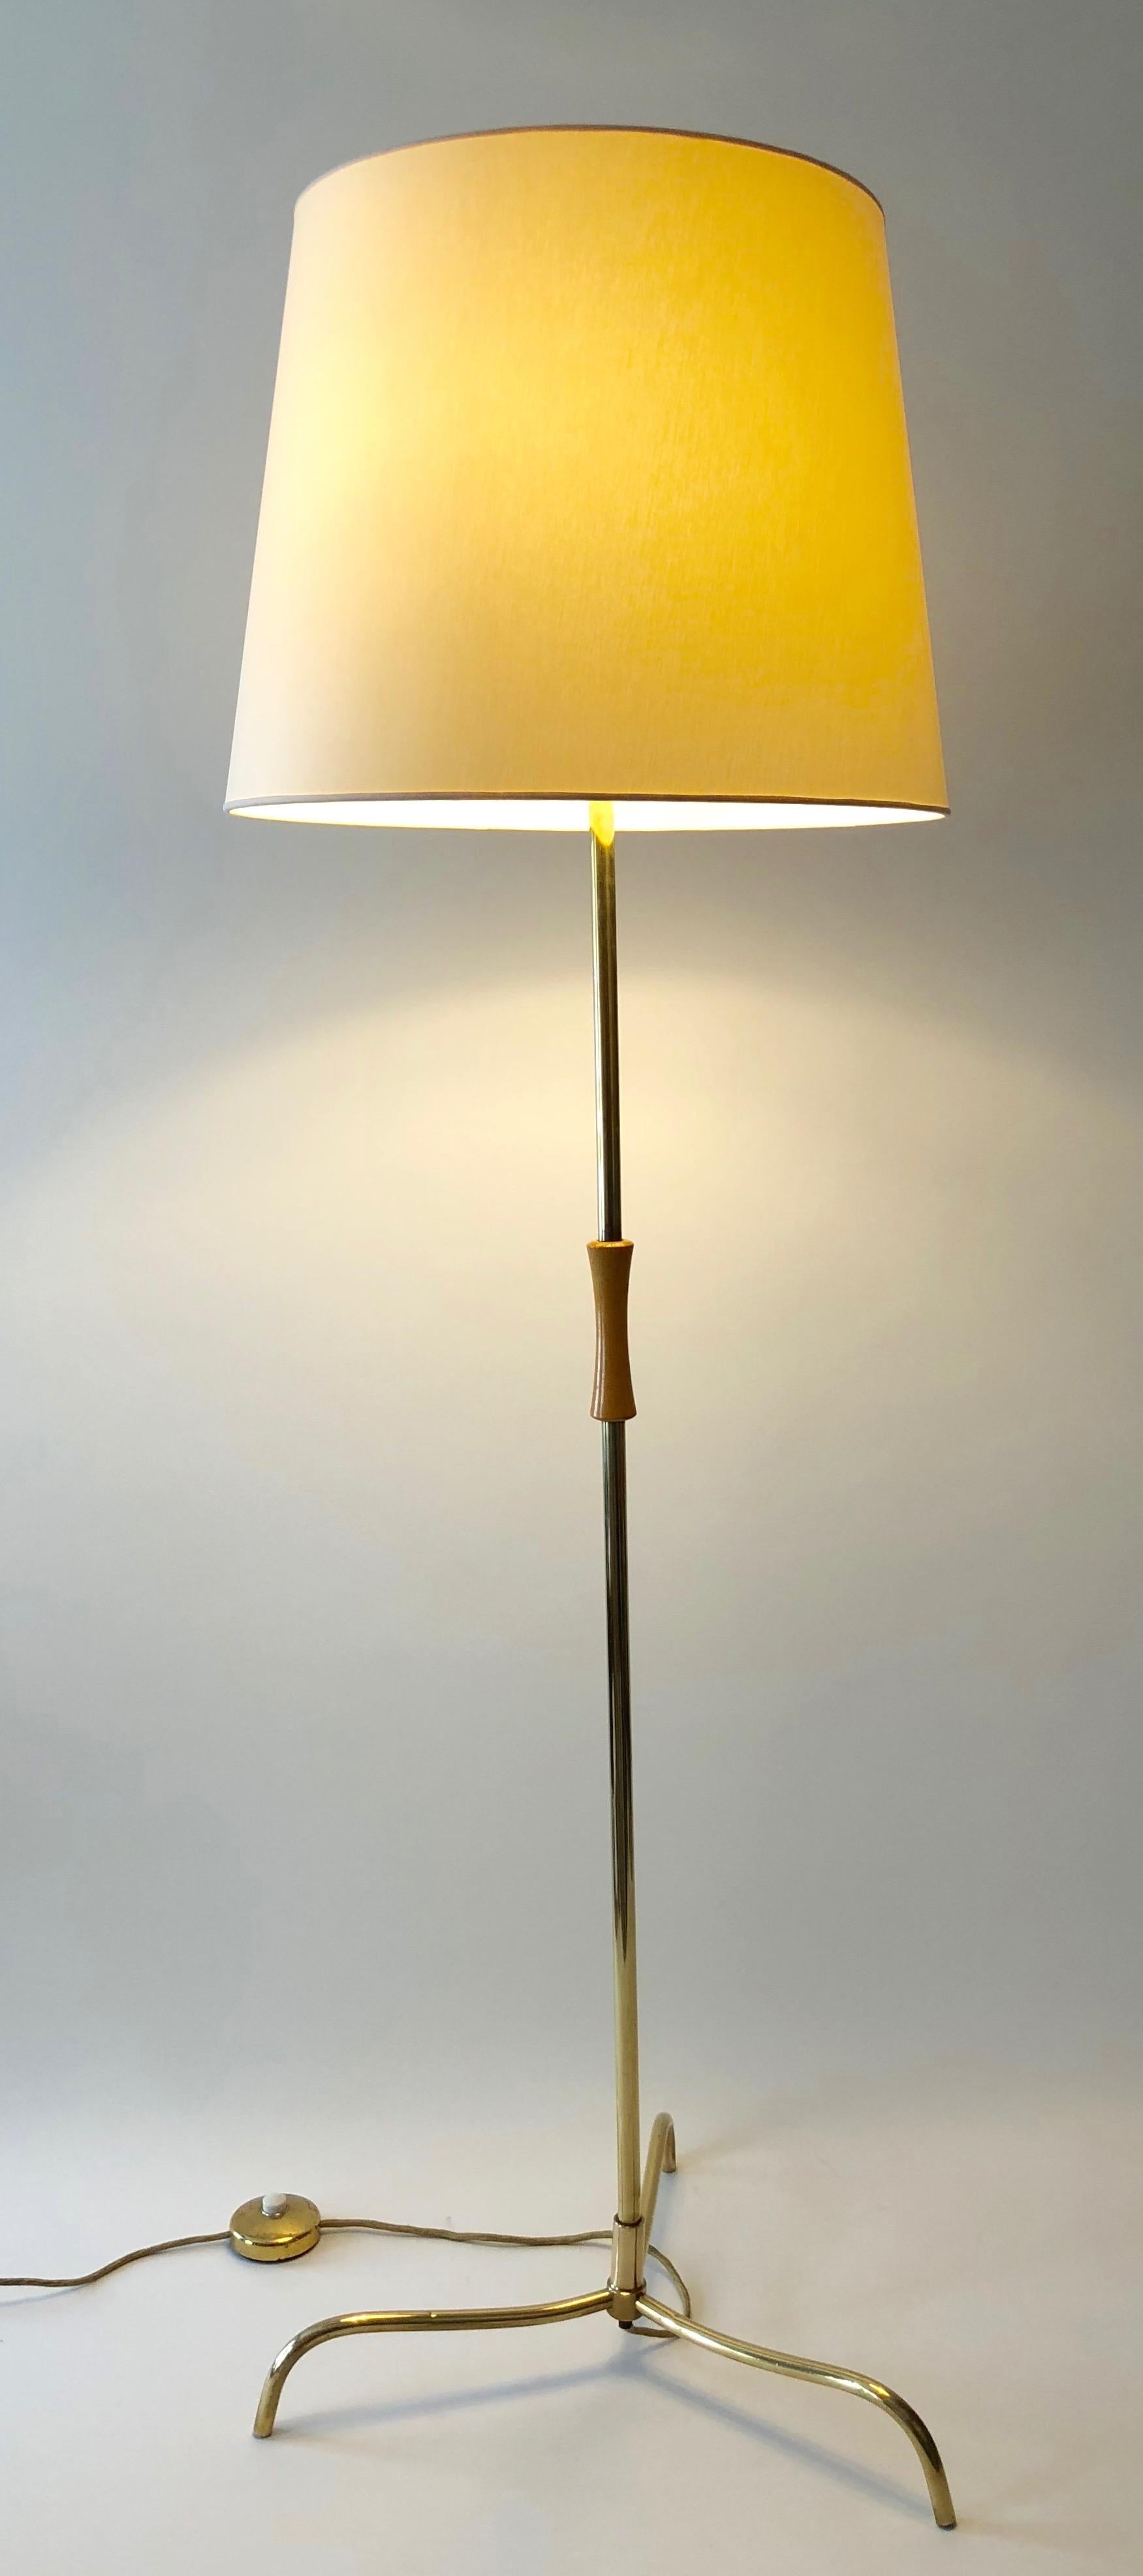 Variation of the Tripod Floor Lamp, Model No. 2003, J.T. Kalmar In Good Condition For Sale In Vienna, Austria